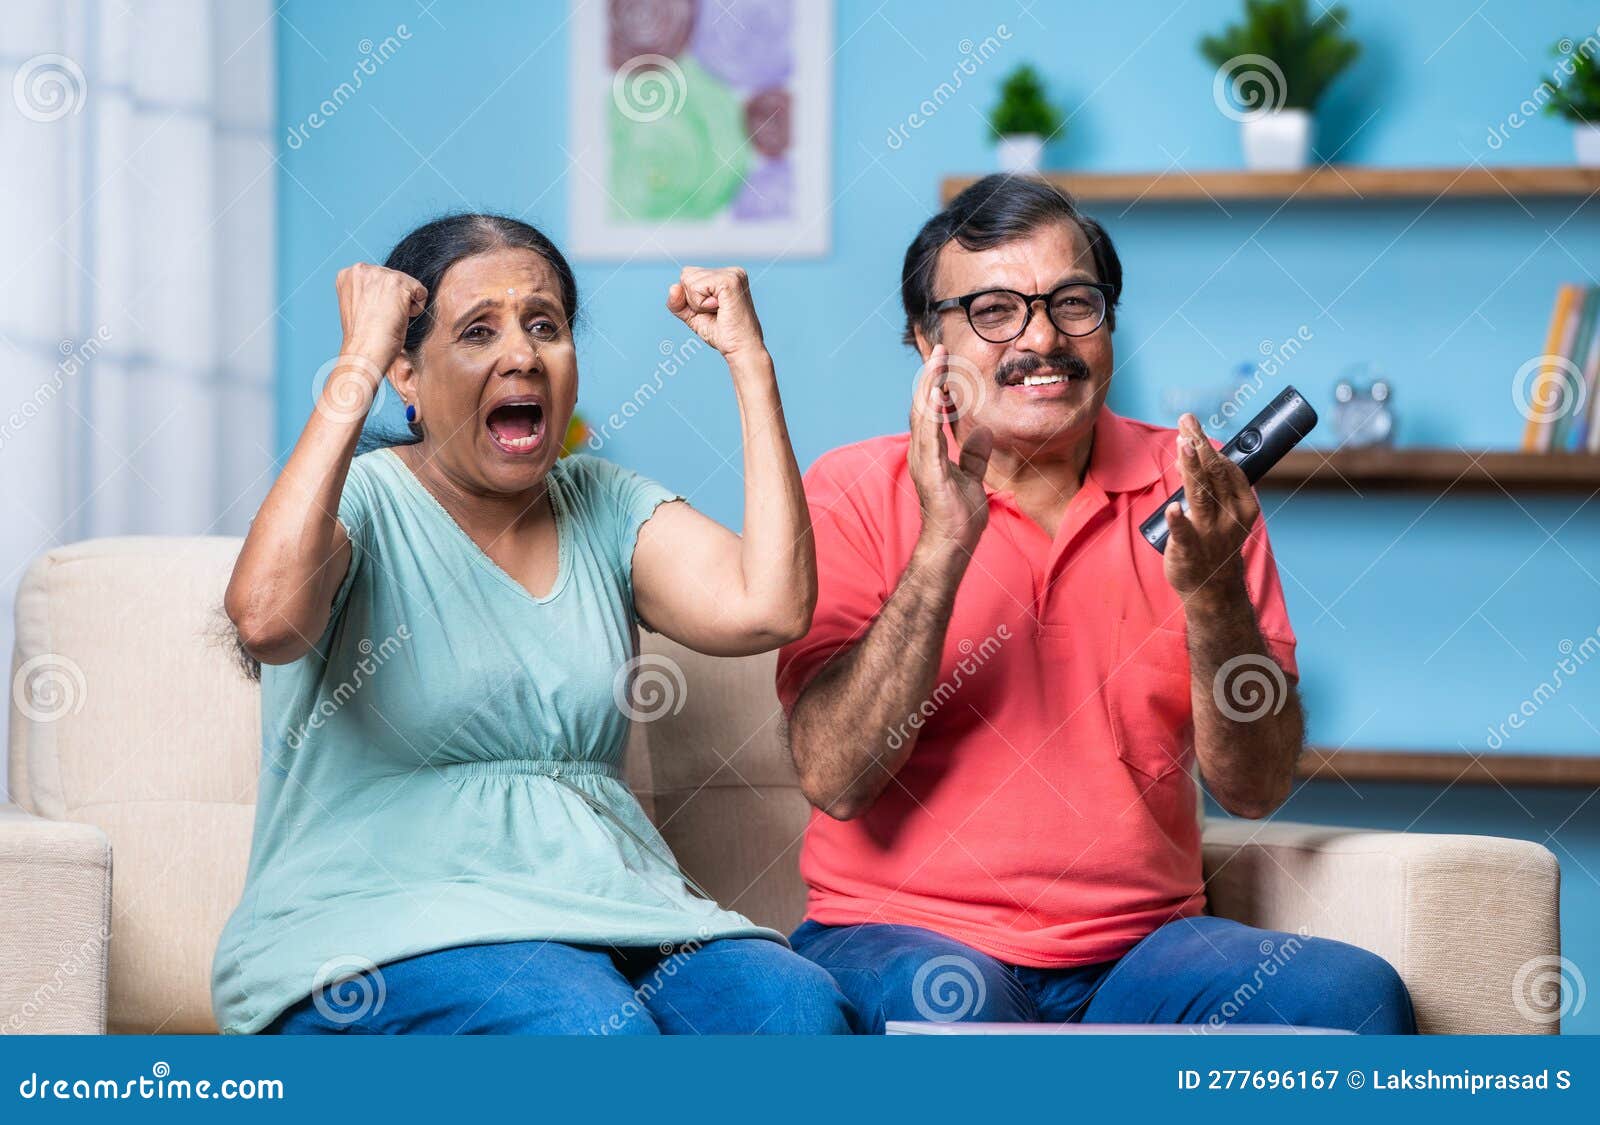 Happy Excited Indian Senior Couple Watching Live Cricket Sports Match on Tv or Television while Sitting on Sofa at Home Stock Image